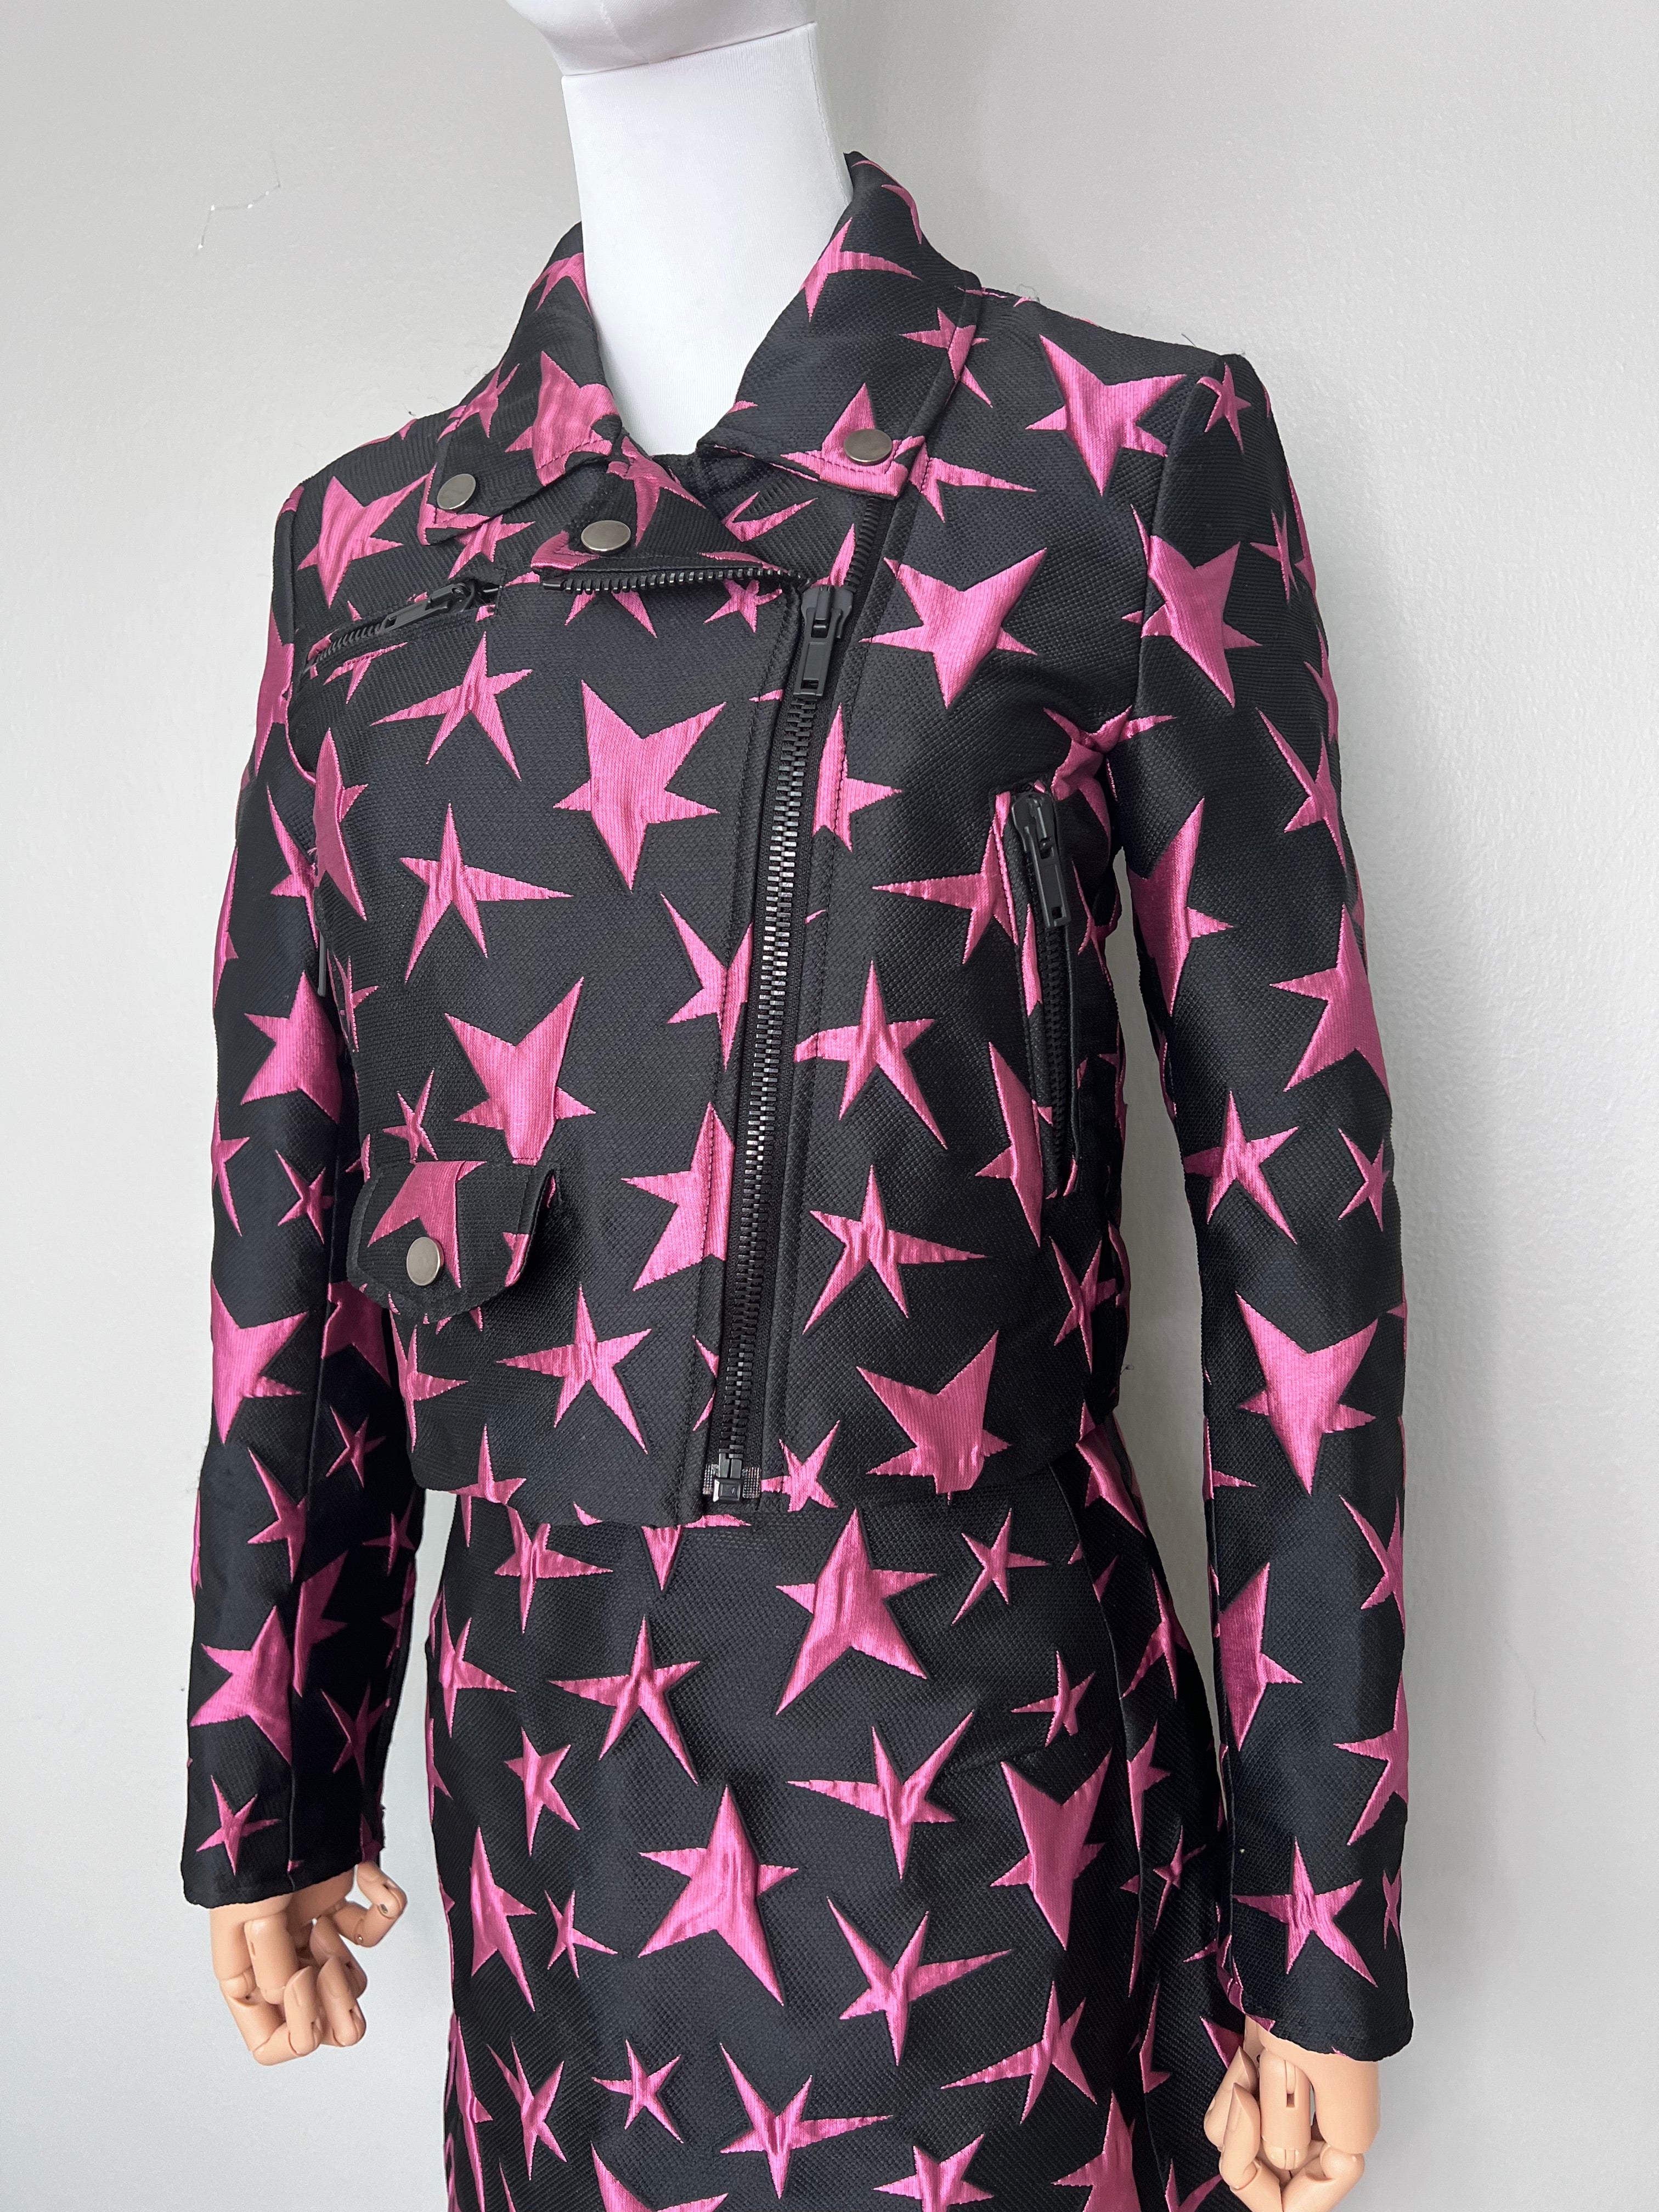 A set of black and pink star patterned two piece - MSGM